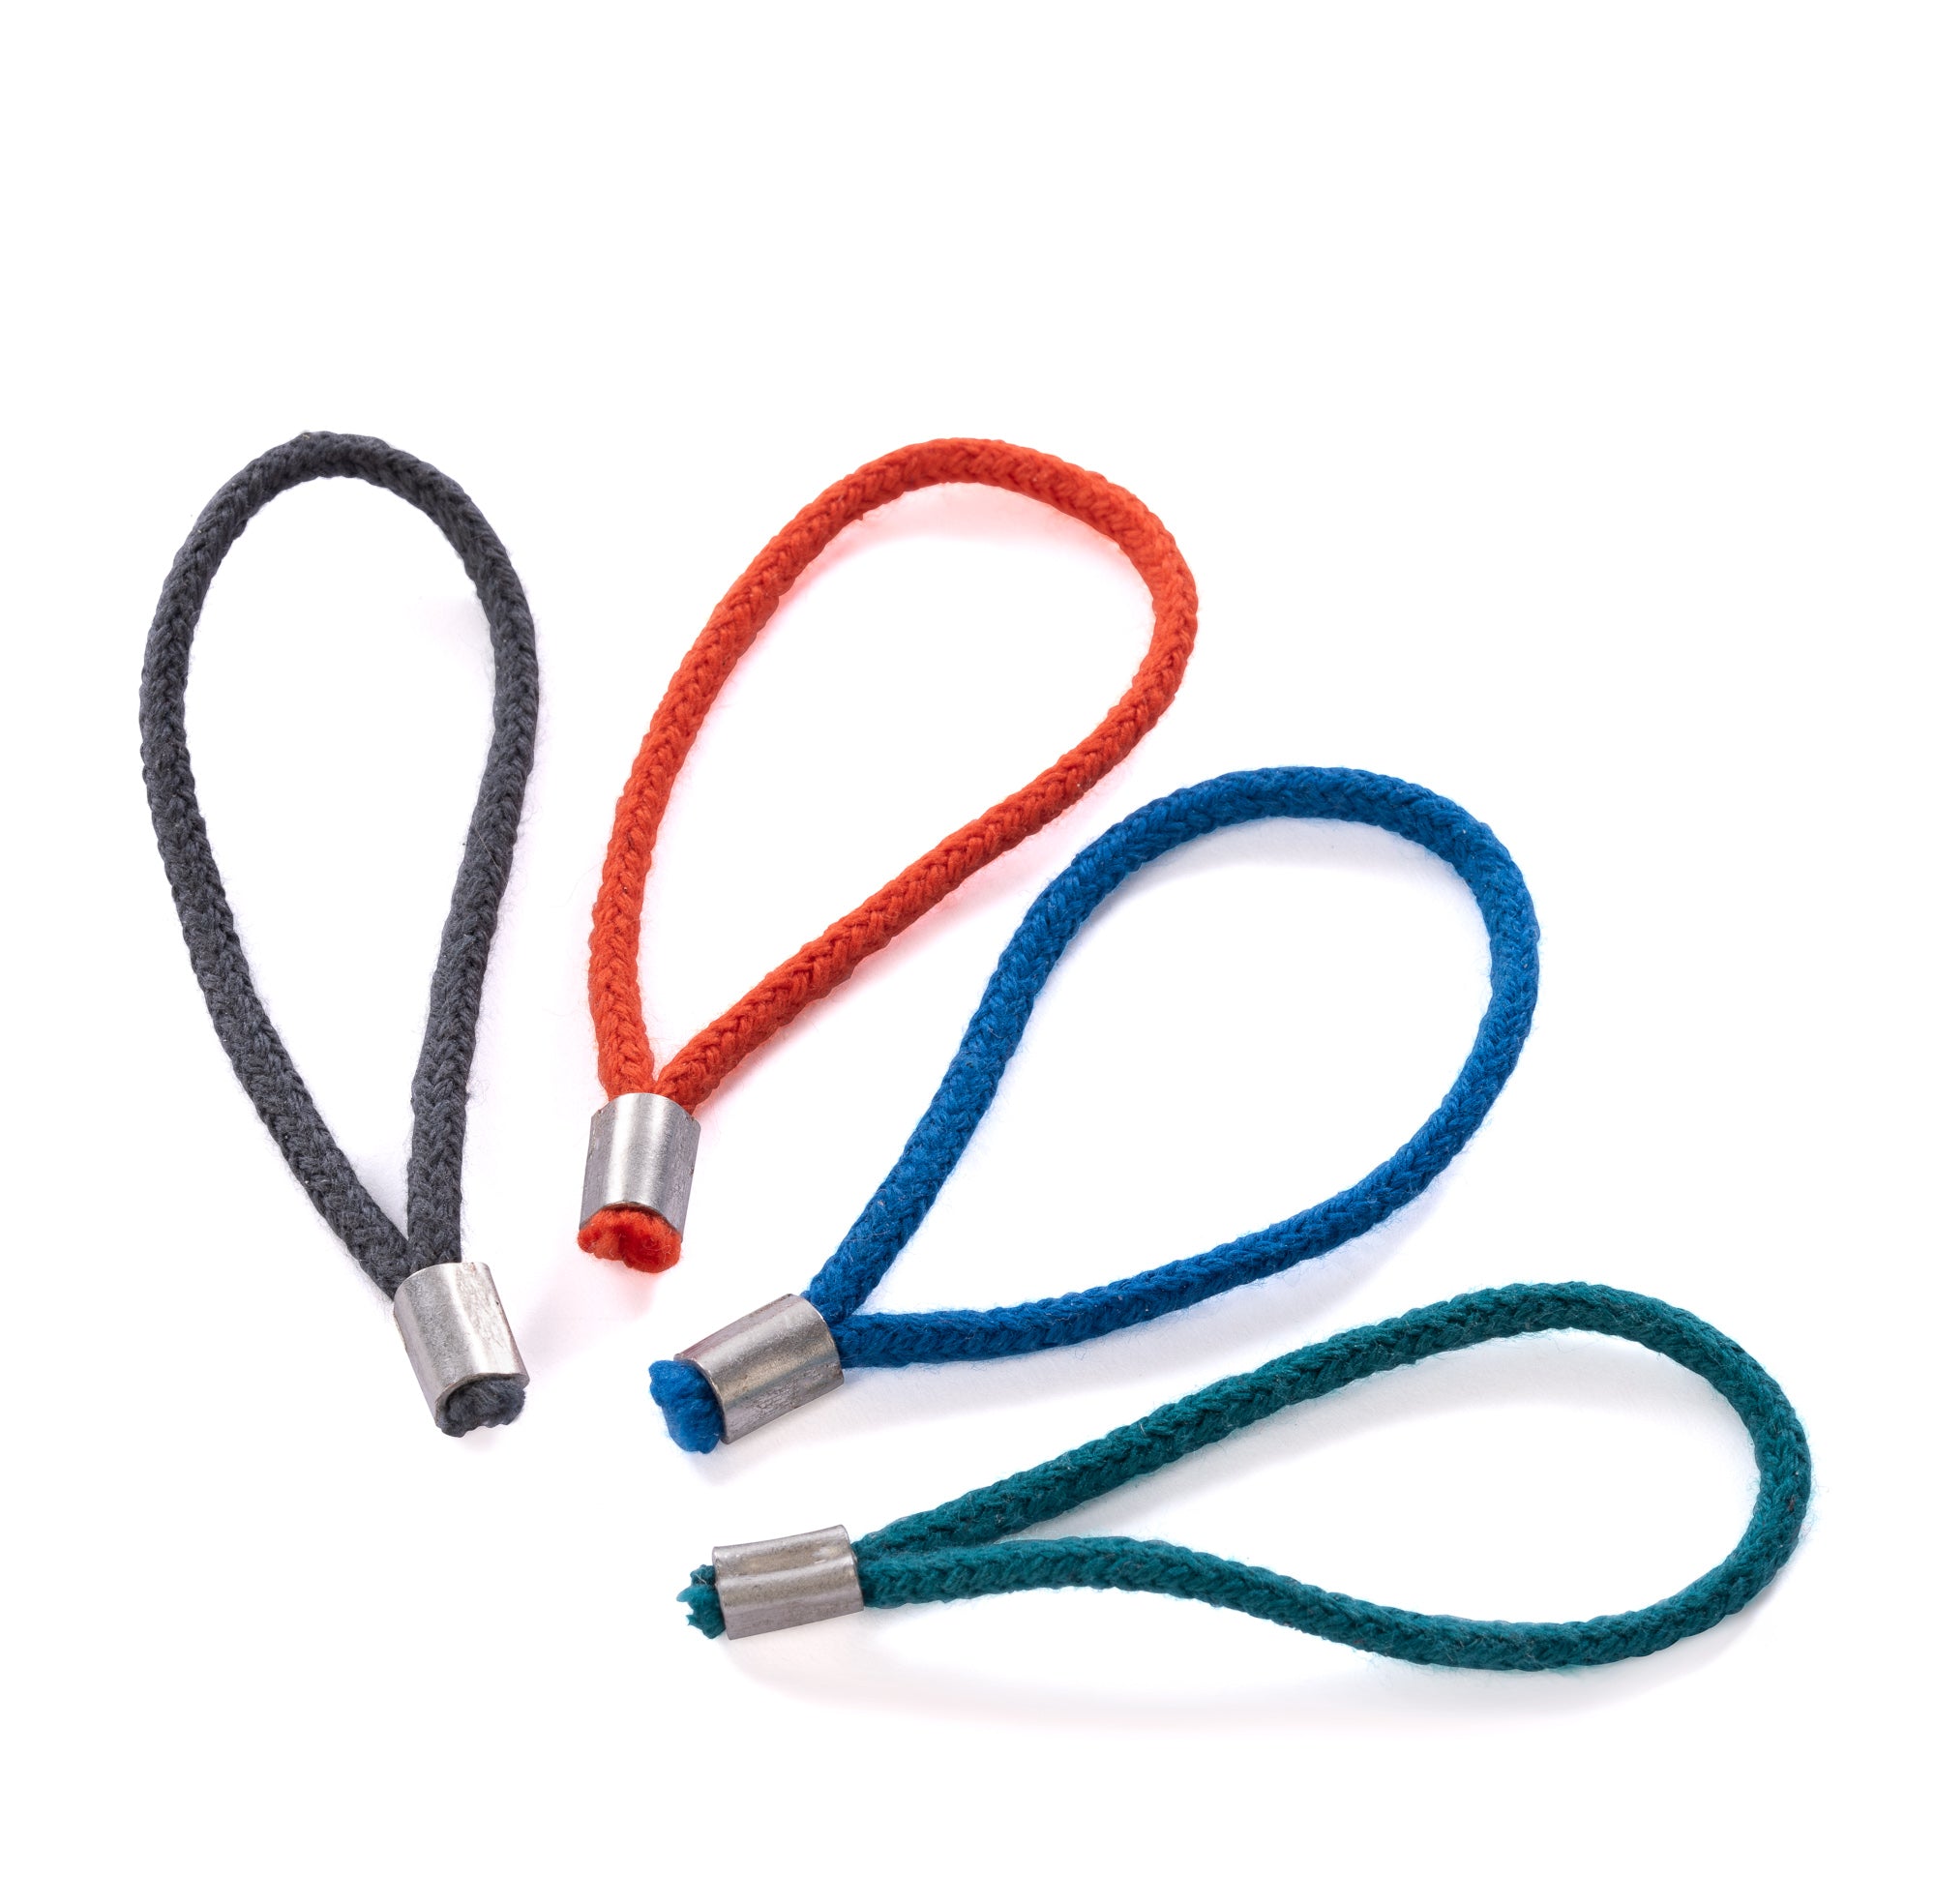 MÜHLE Companion Exchangeable Cord